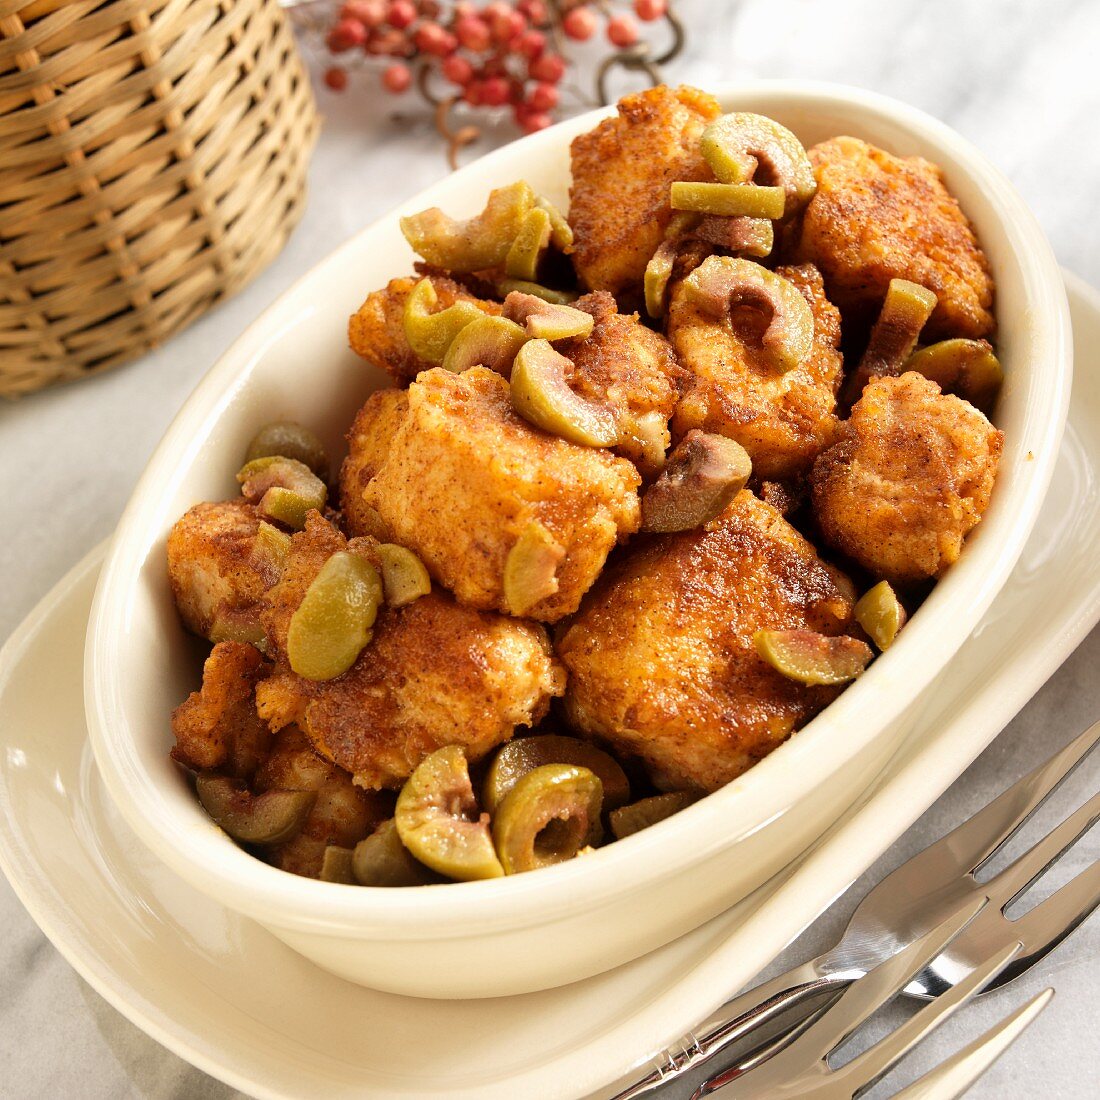 Chicken with sherry and green olives (Spain)